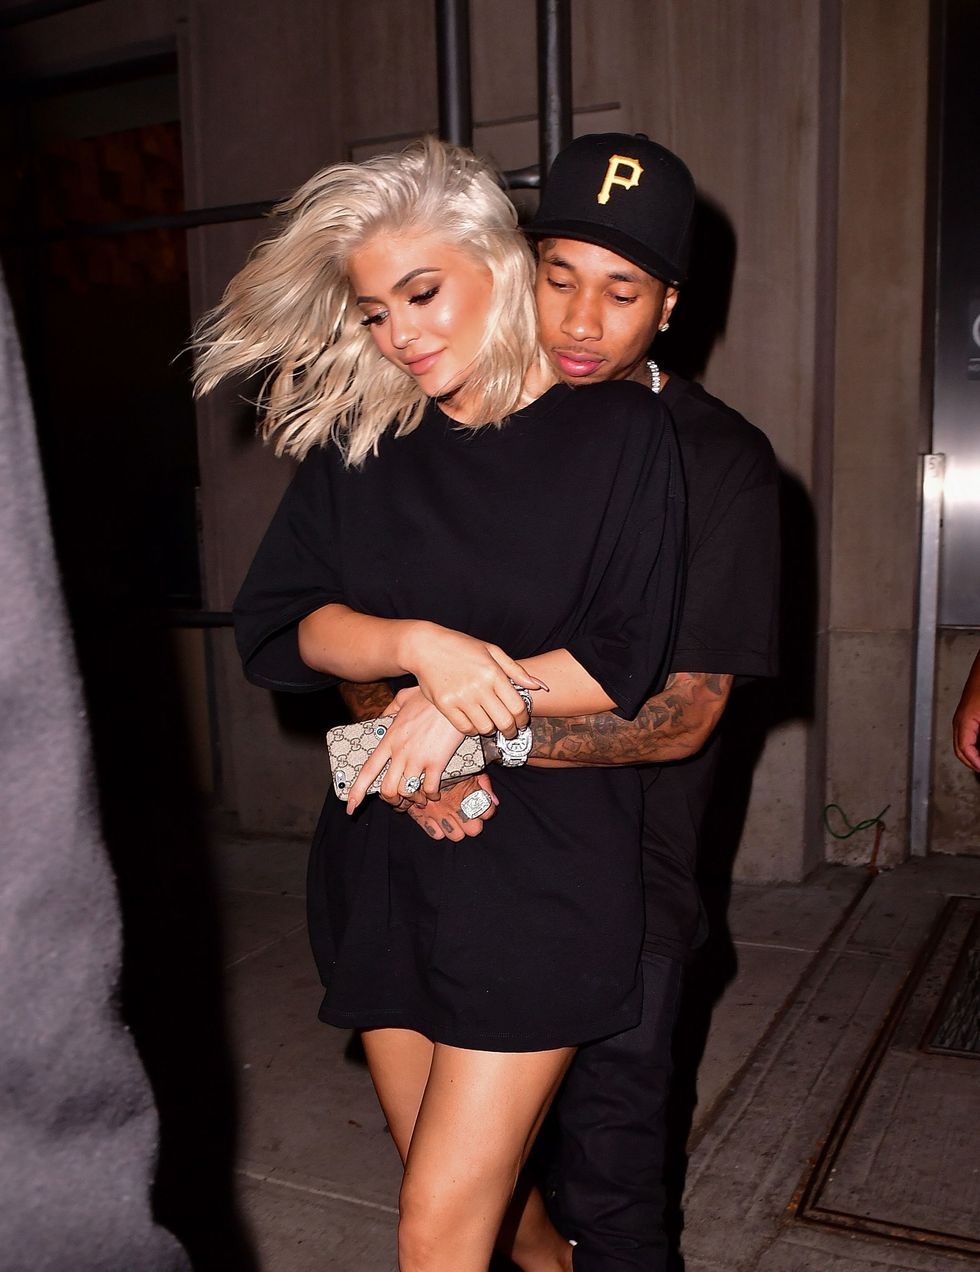 Why Kylie Jenner and Tyga Should Never Be #RelationshipGoals